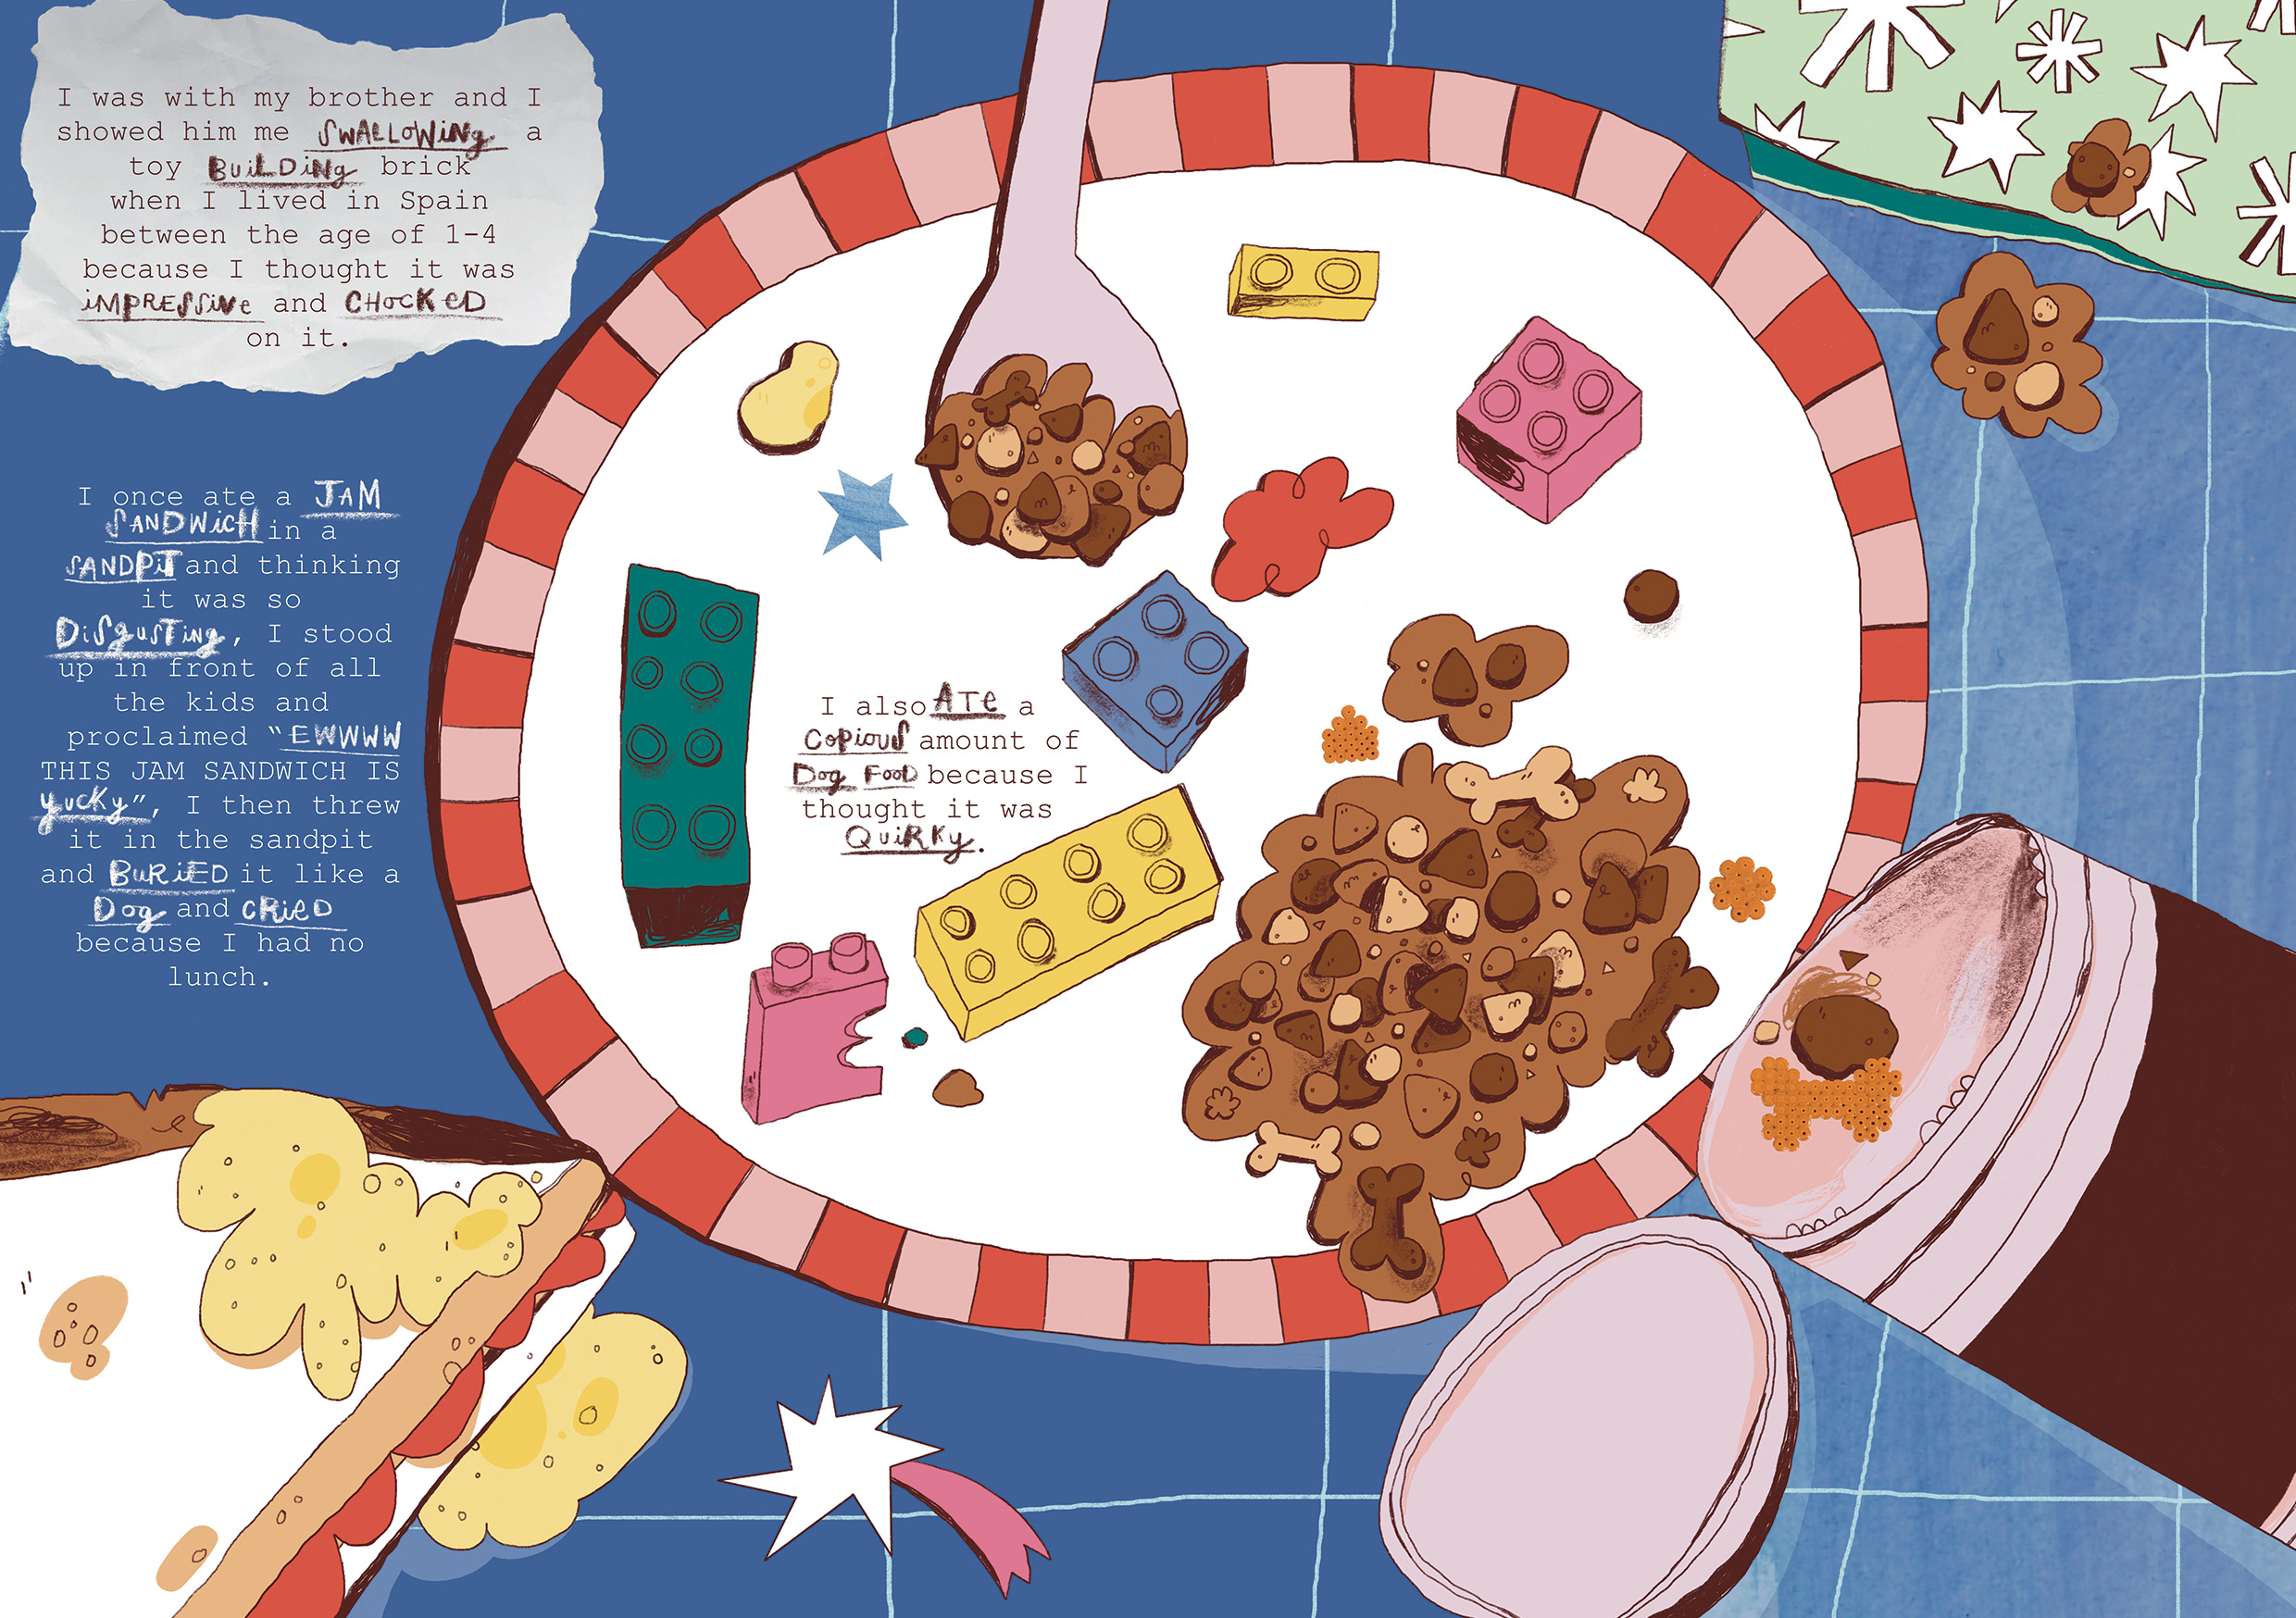 A mixed media illustration of a plate filled with interesting snacks including a sand covered jam sandwich, dog food, and lego bricks